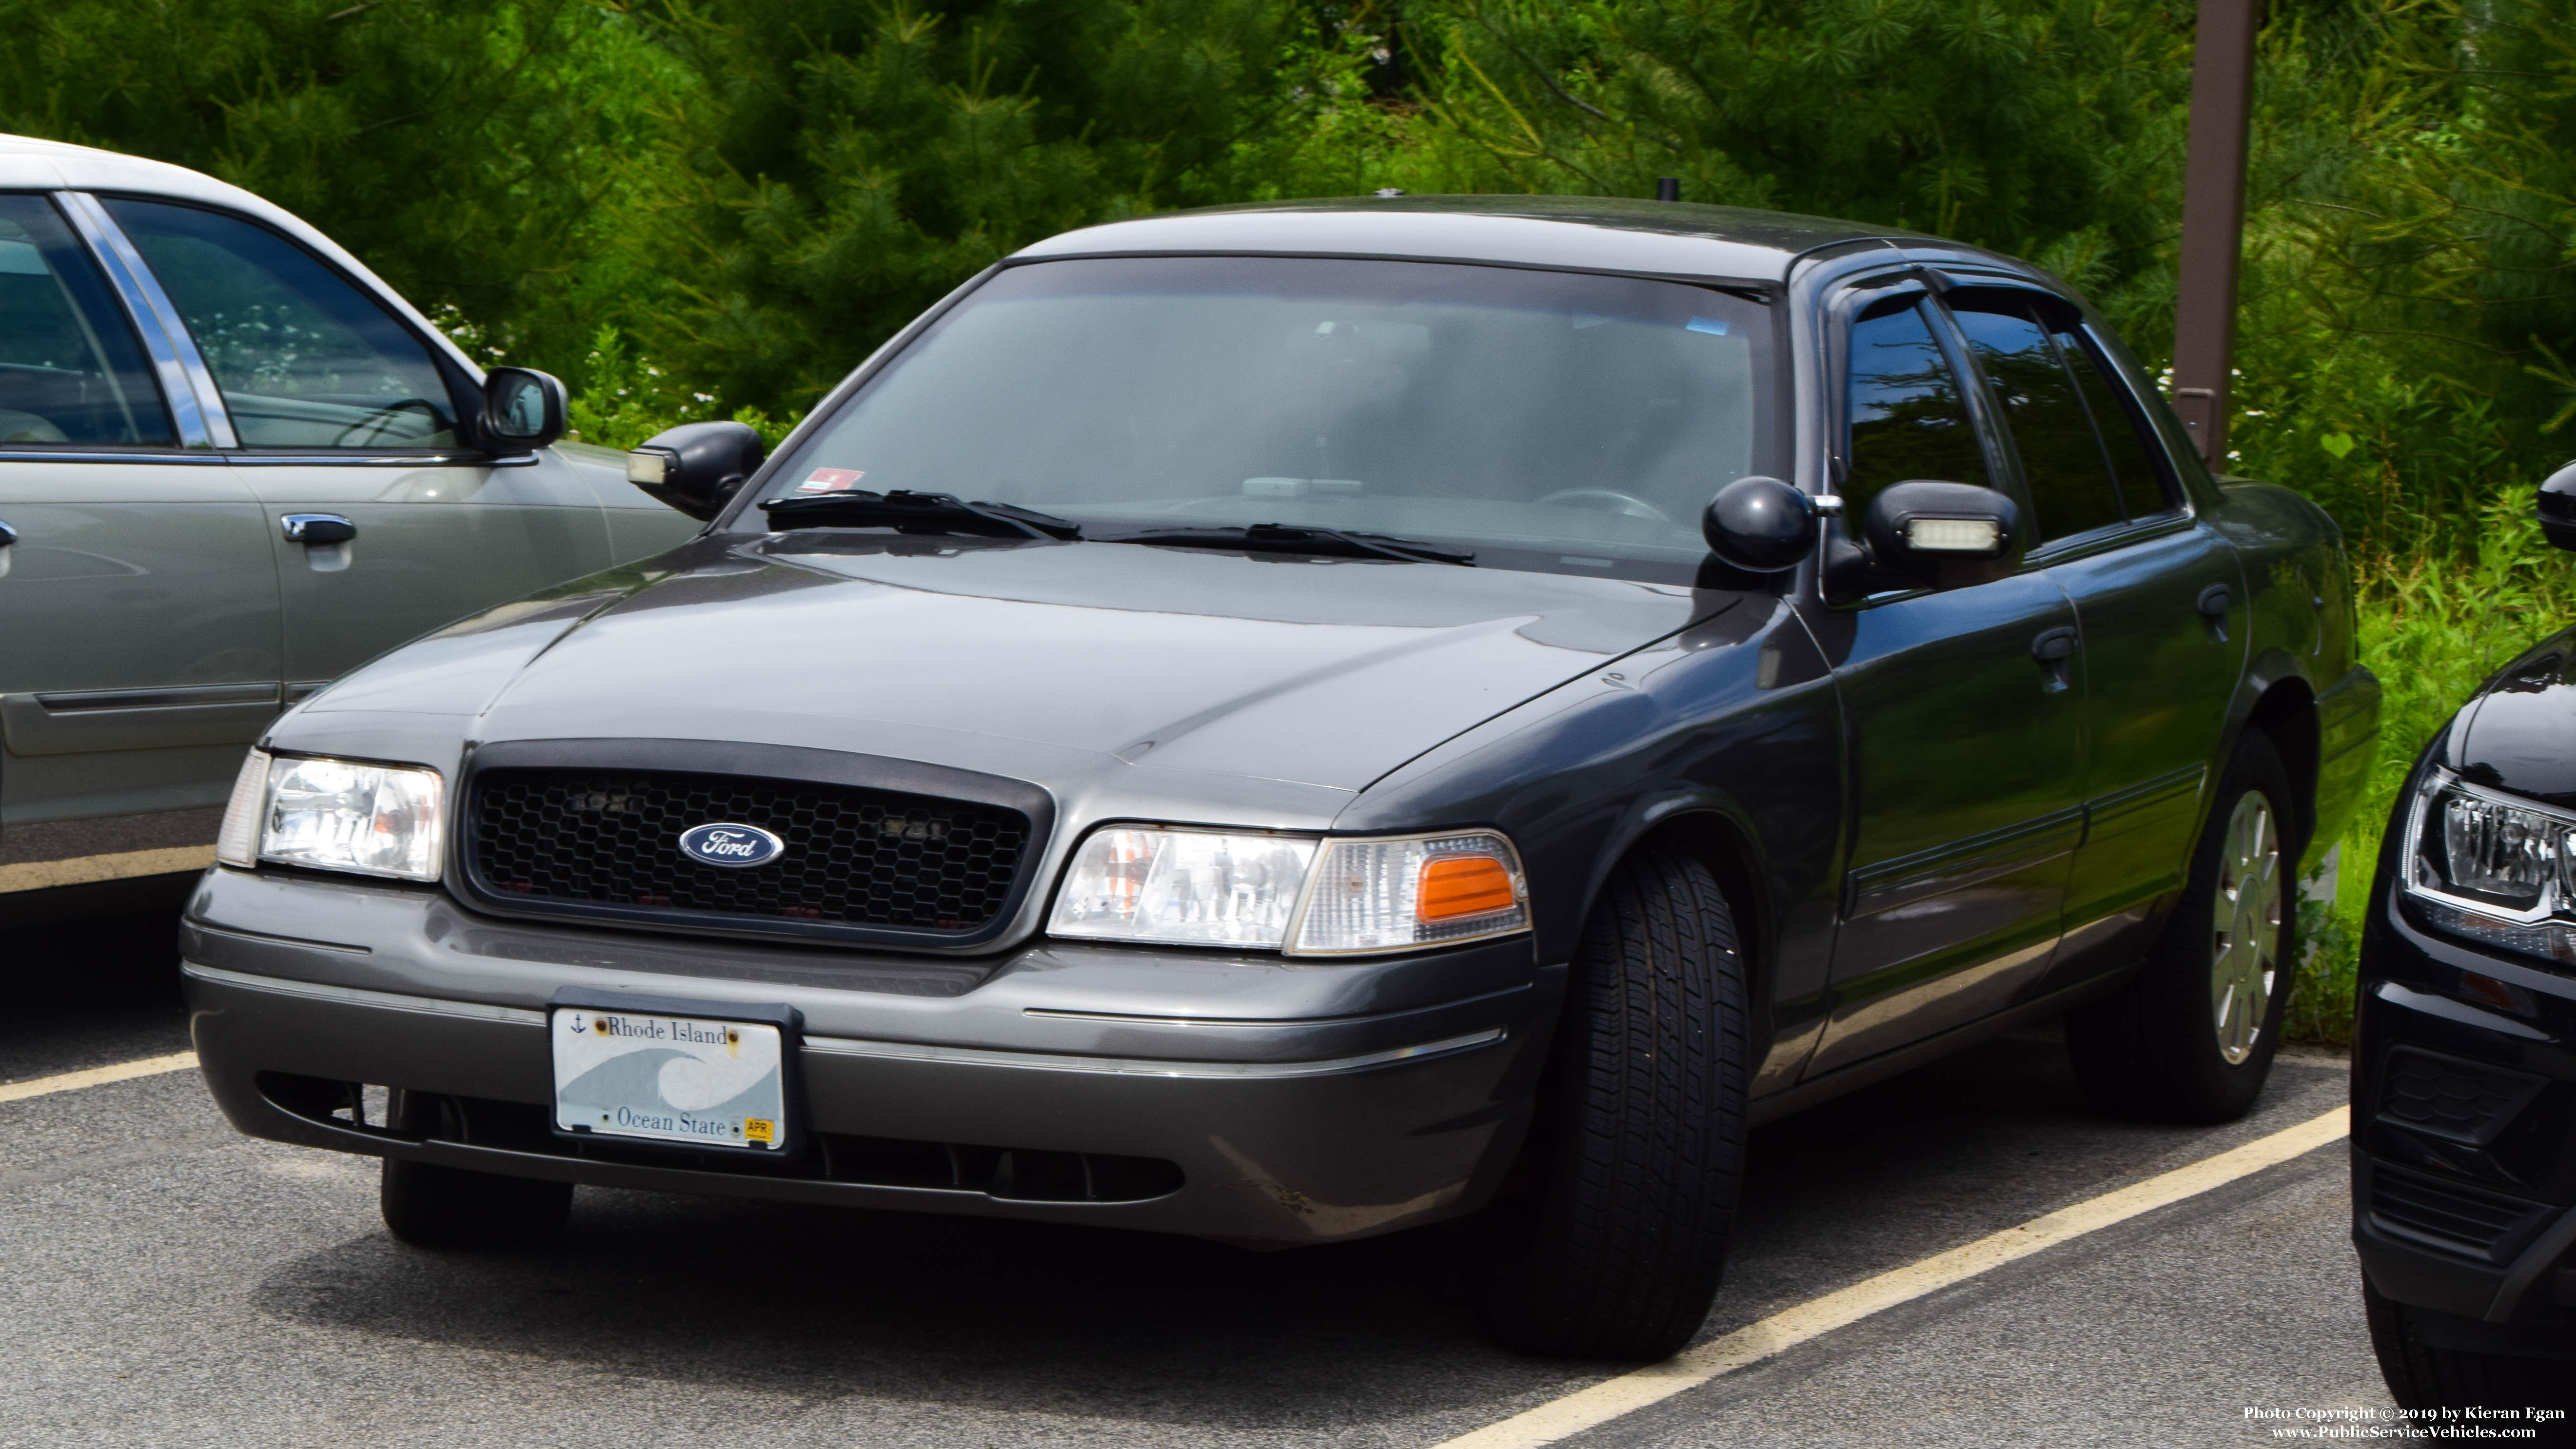 A photo  of Lincoln Police
            Unmarked Unit, a 2009-2011 Ford Crown Victoria Police Interceptor             taken by Kieran Egan